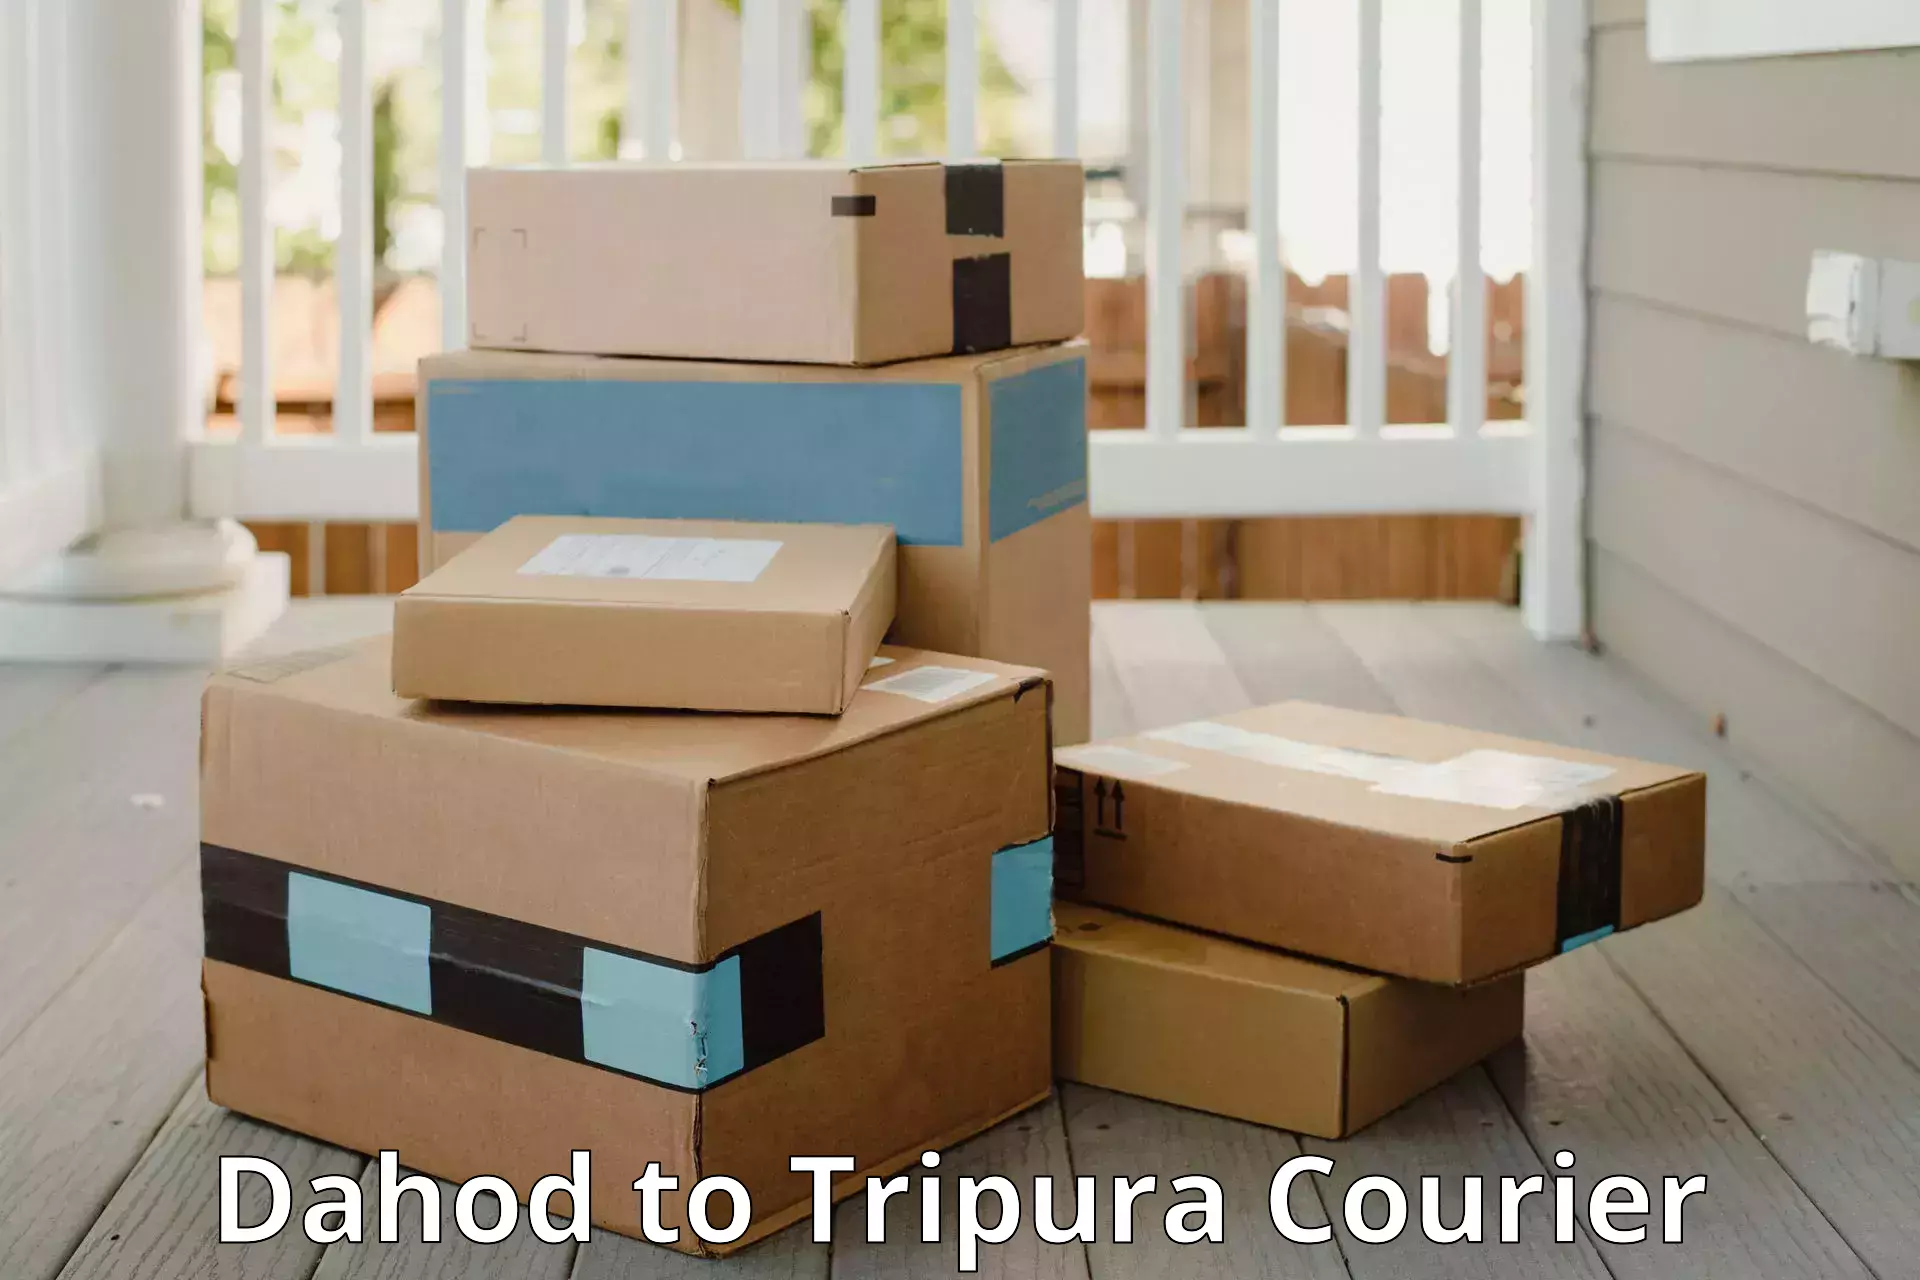 Instant baggage transport quote in Dahod to Udaipur Tripura